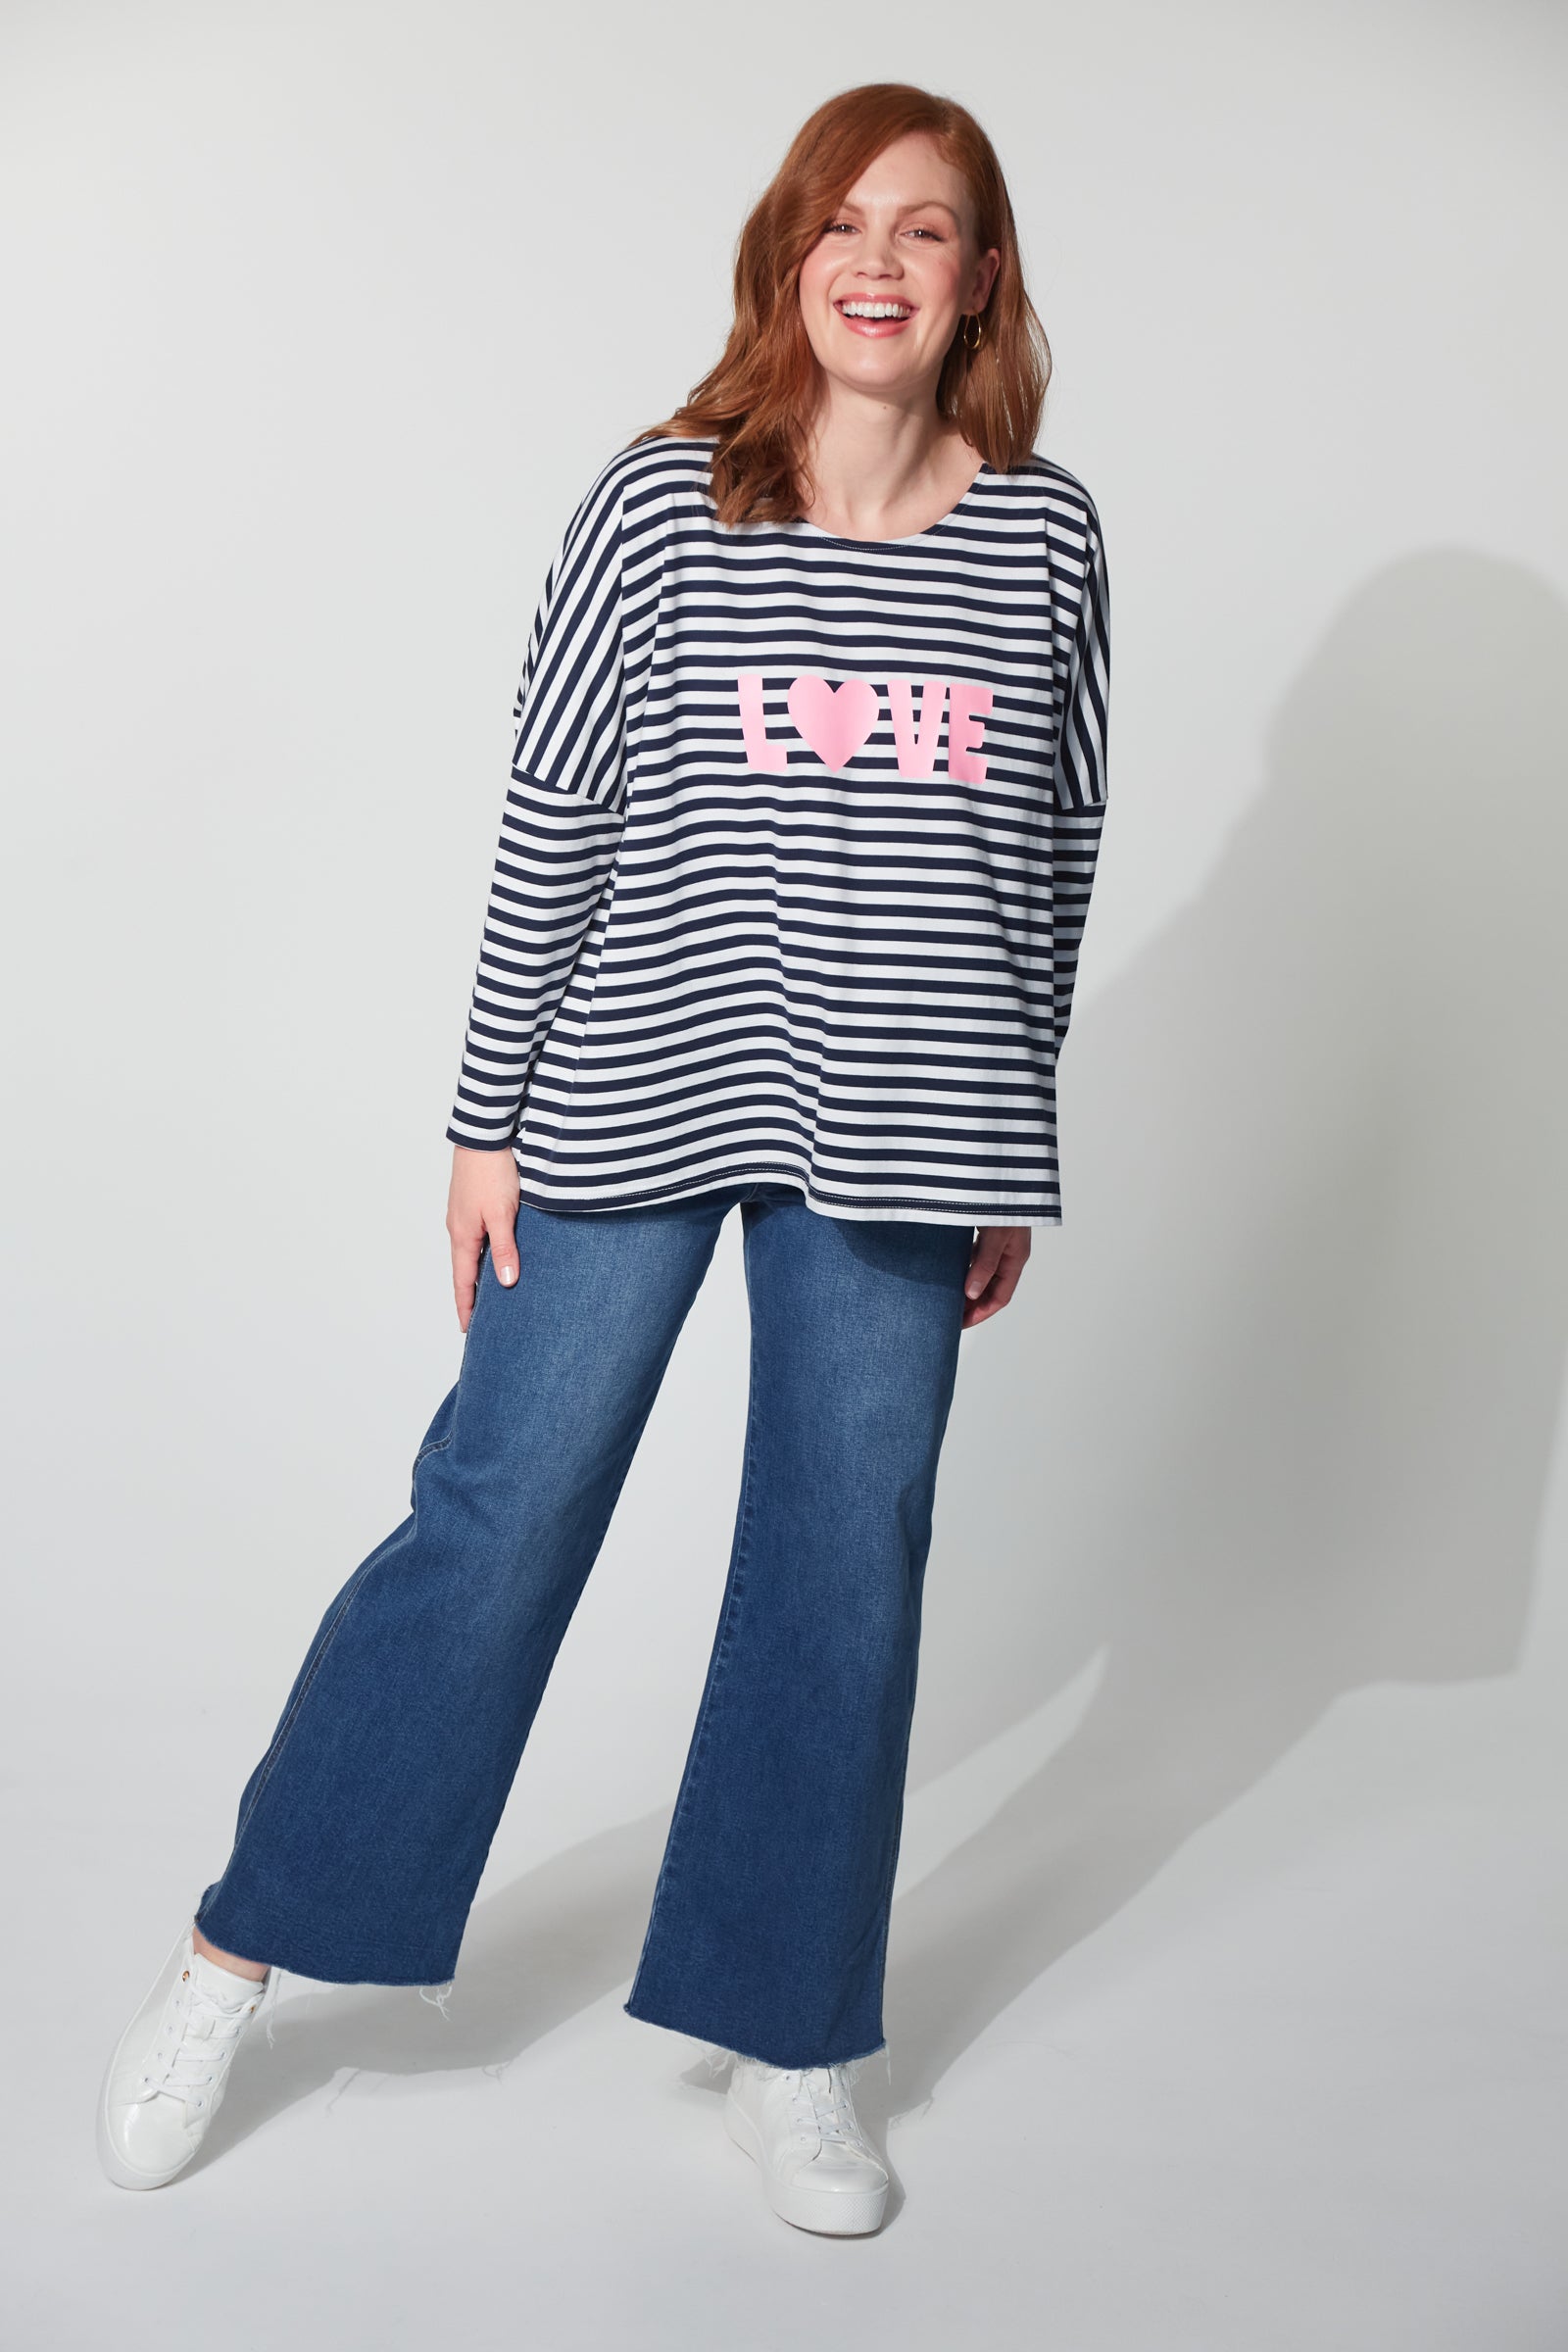 Mala One Size T-Shirt in Midnight Love